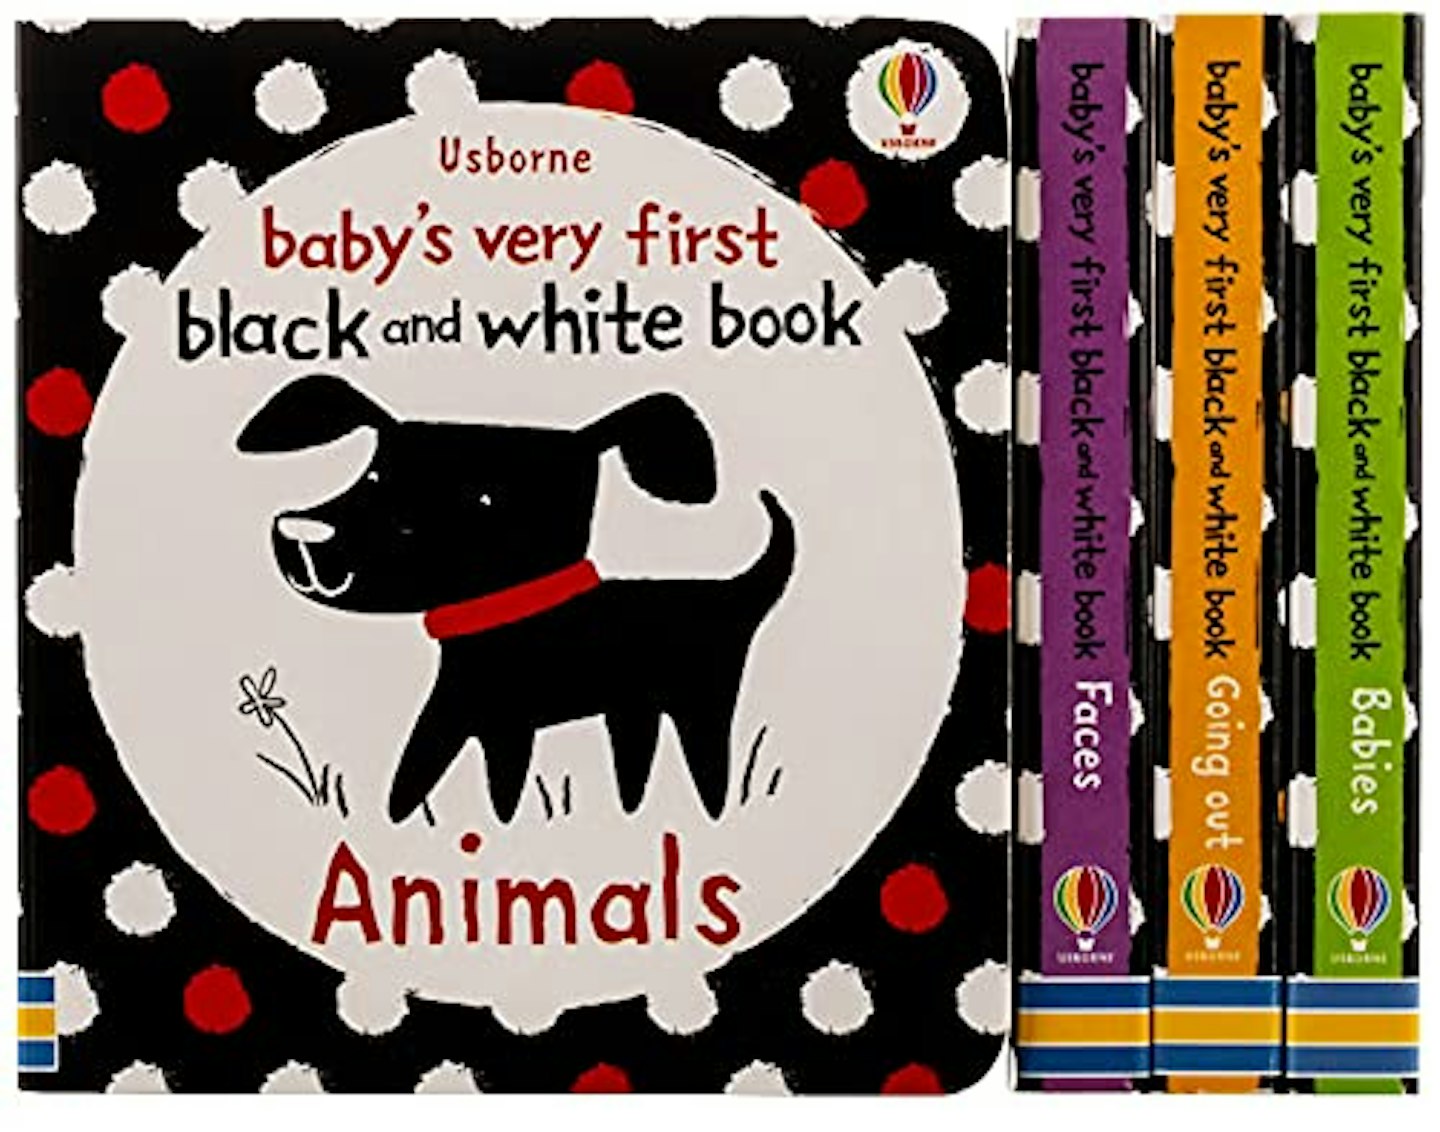 Babyu0026#039;s Very First Black and White Little Library by Stella Baggott